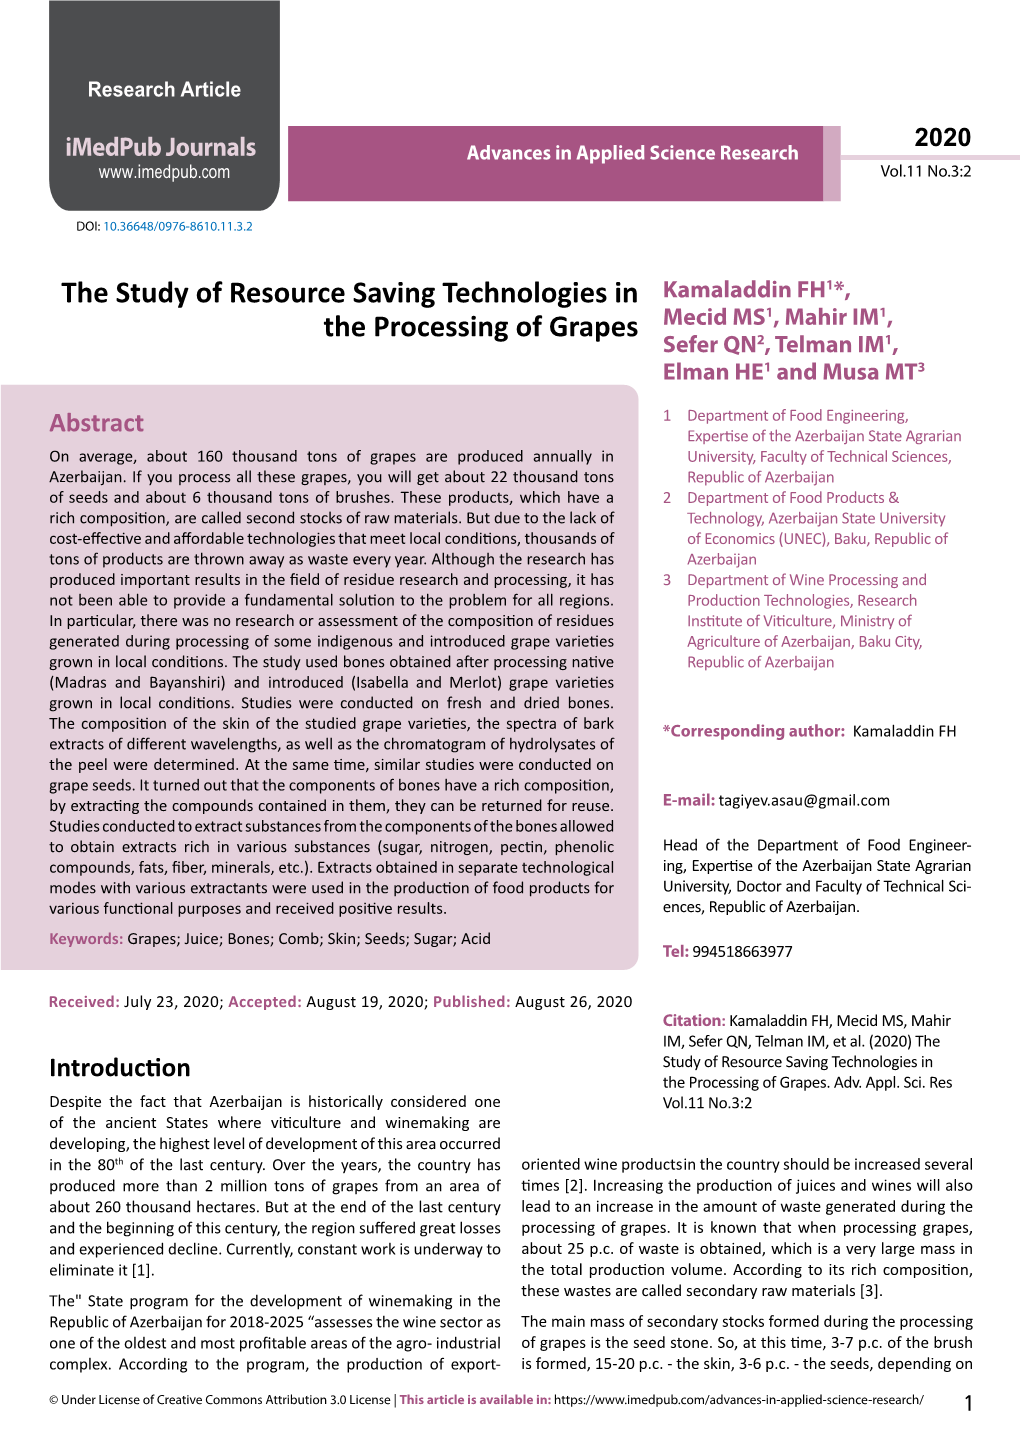 The Study of Resource Saving Technologies in the Processing Of